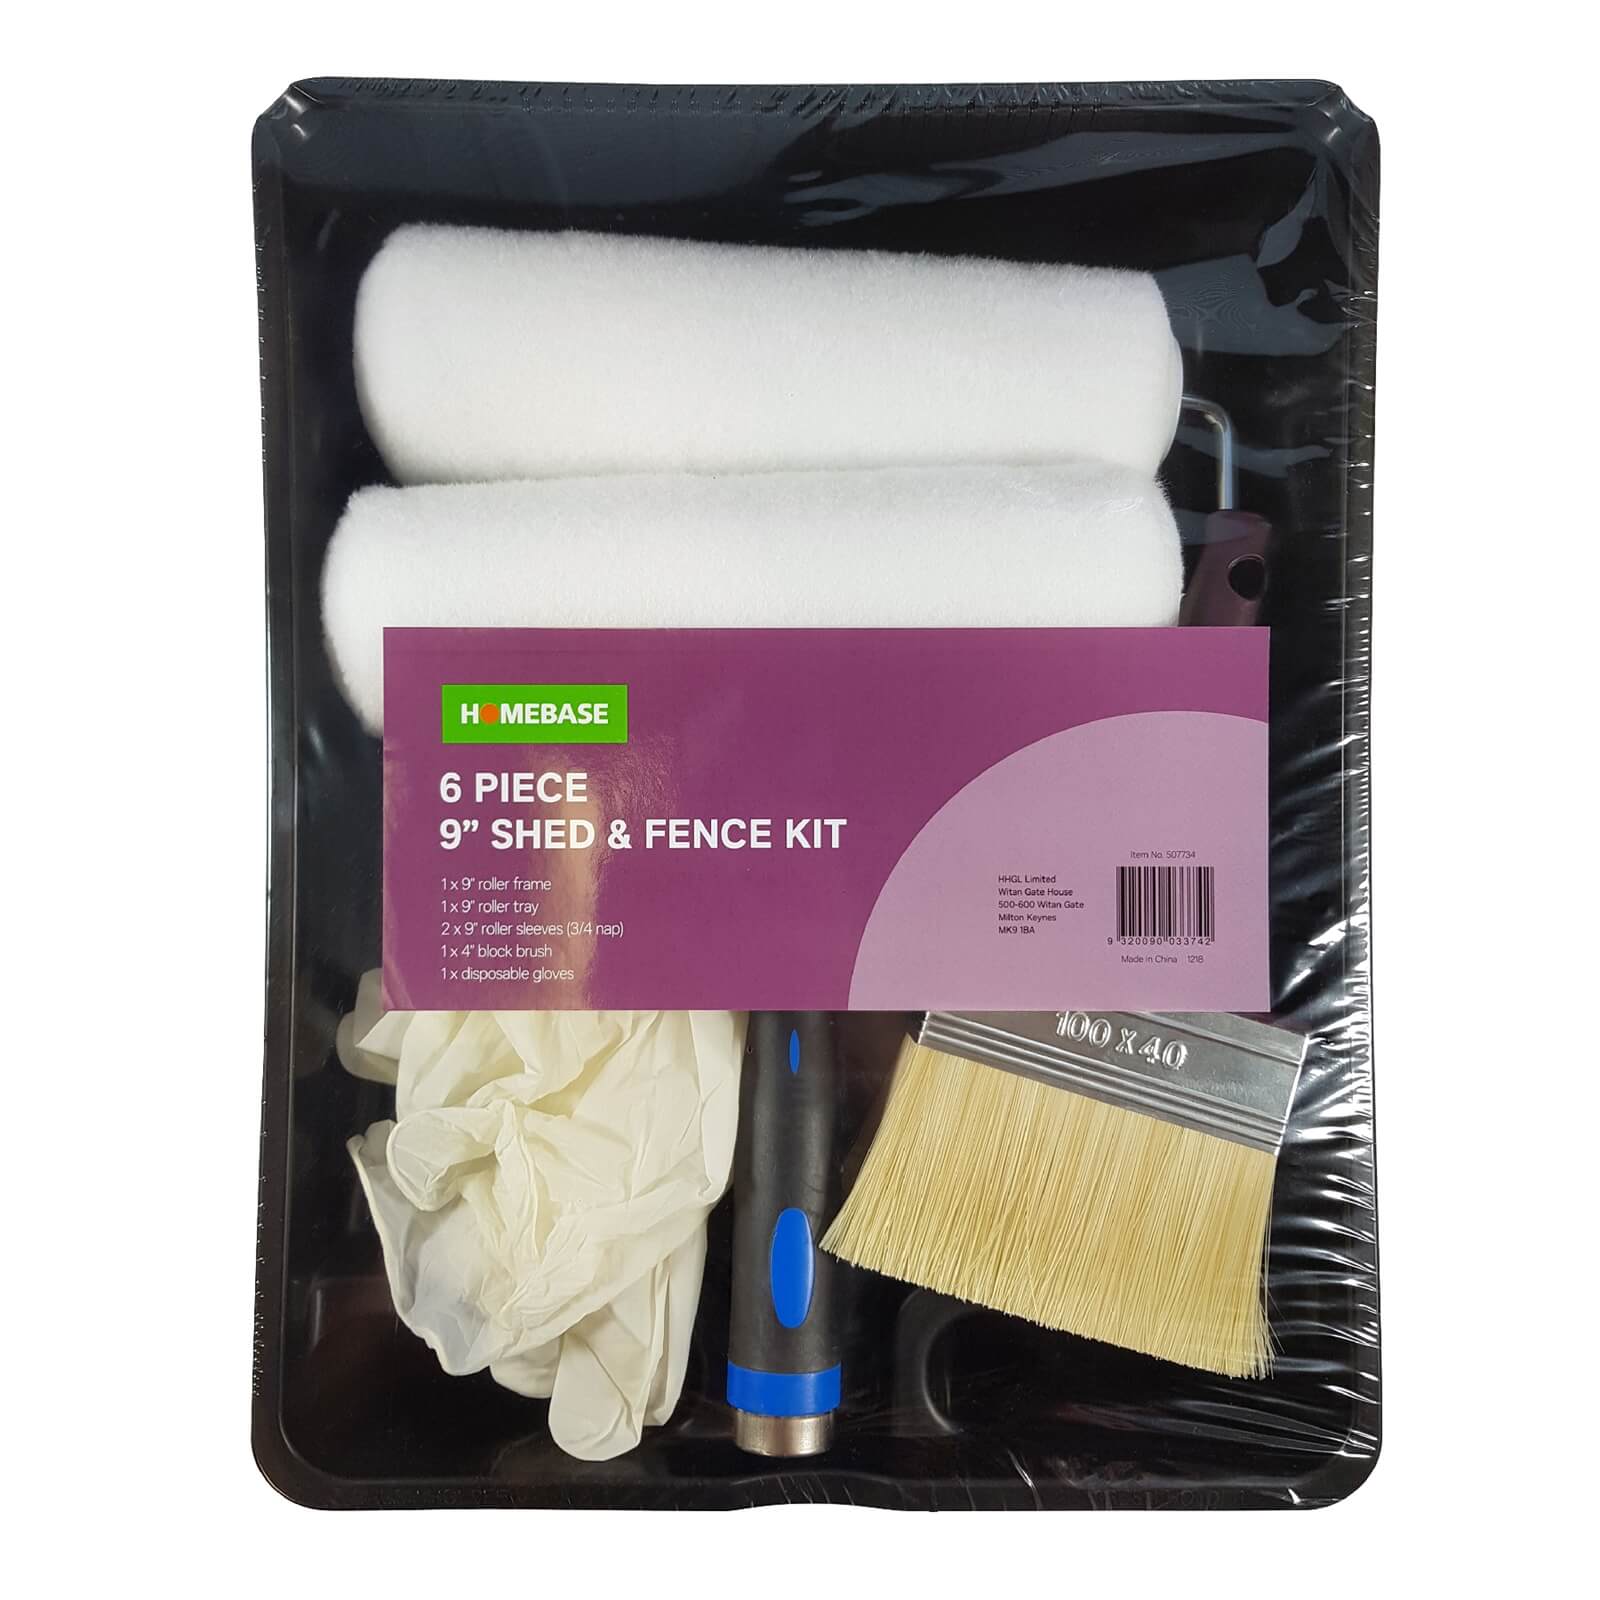 Homebase Shed & Fence 6 Piece Kit 9 inch